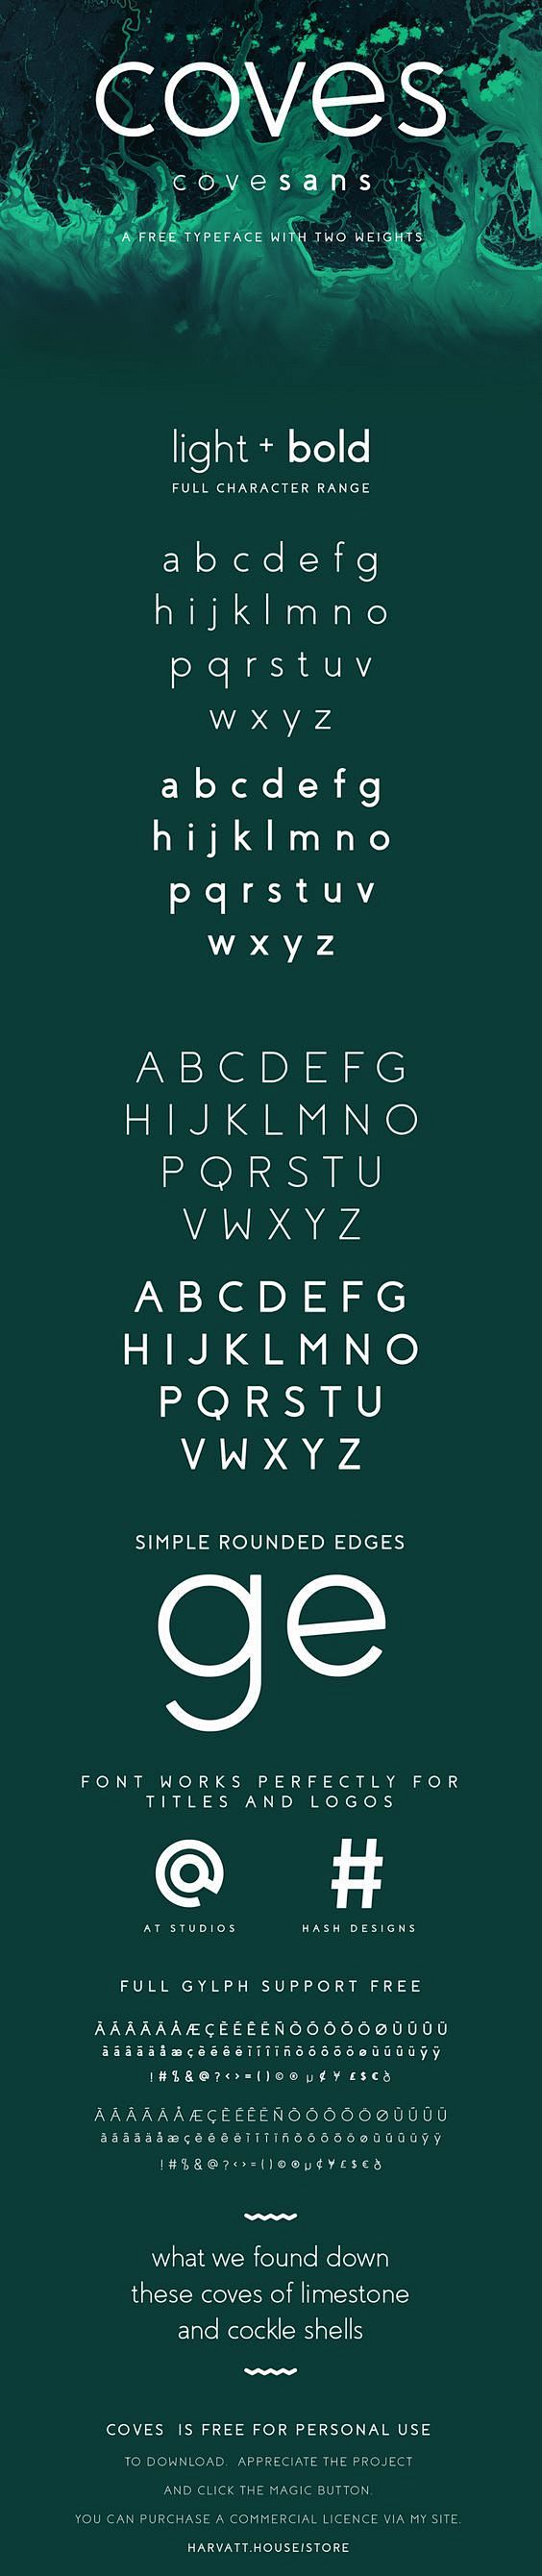 Coves is a free font...